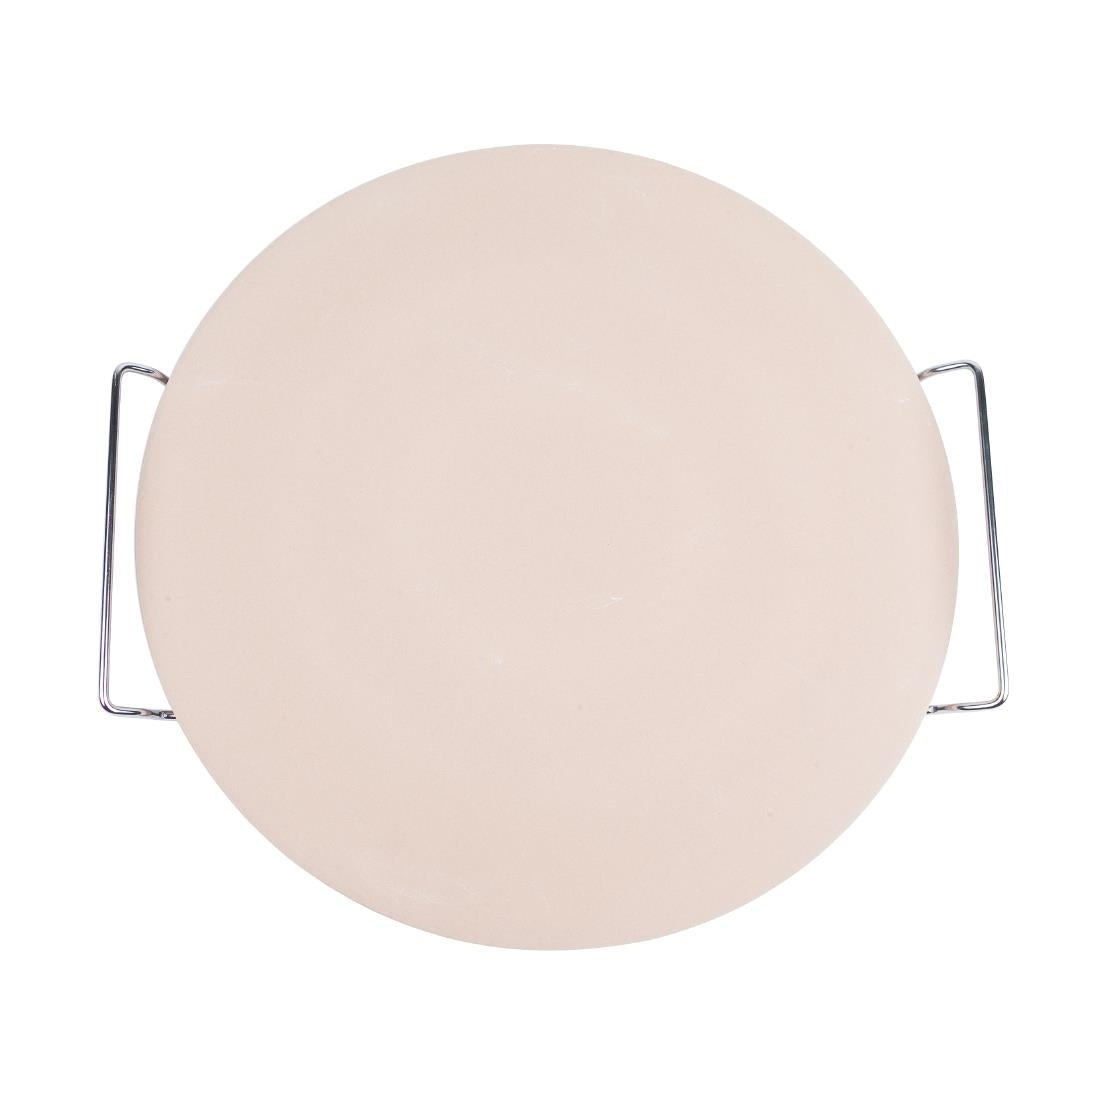 CL714 Round Pizza Stone with Metal Serving Rack